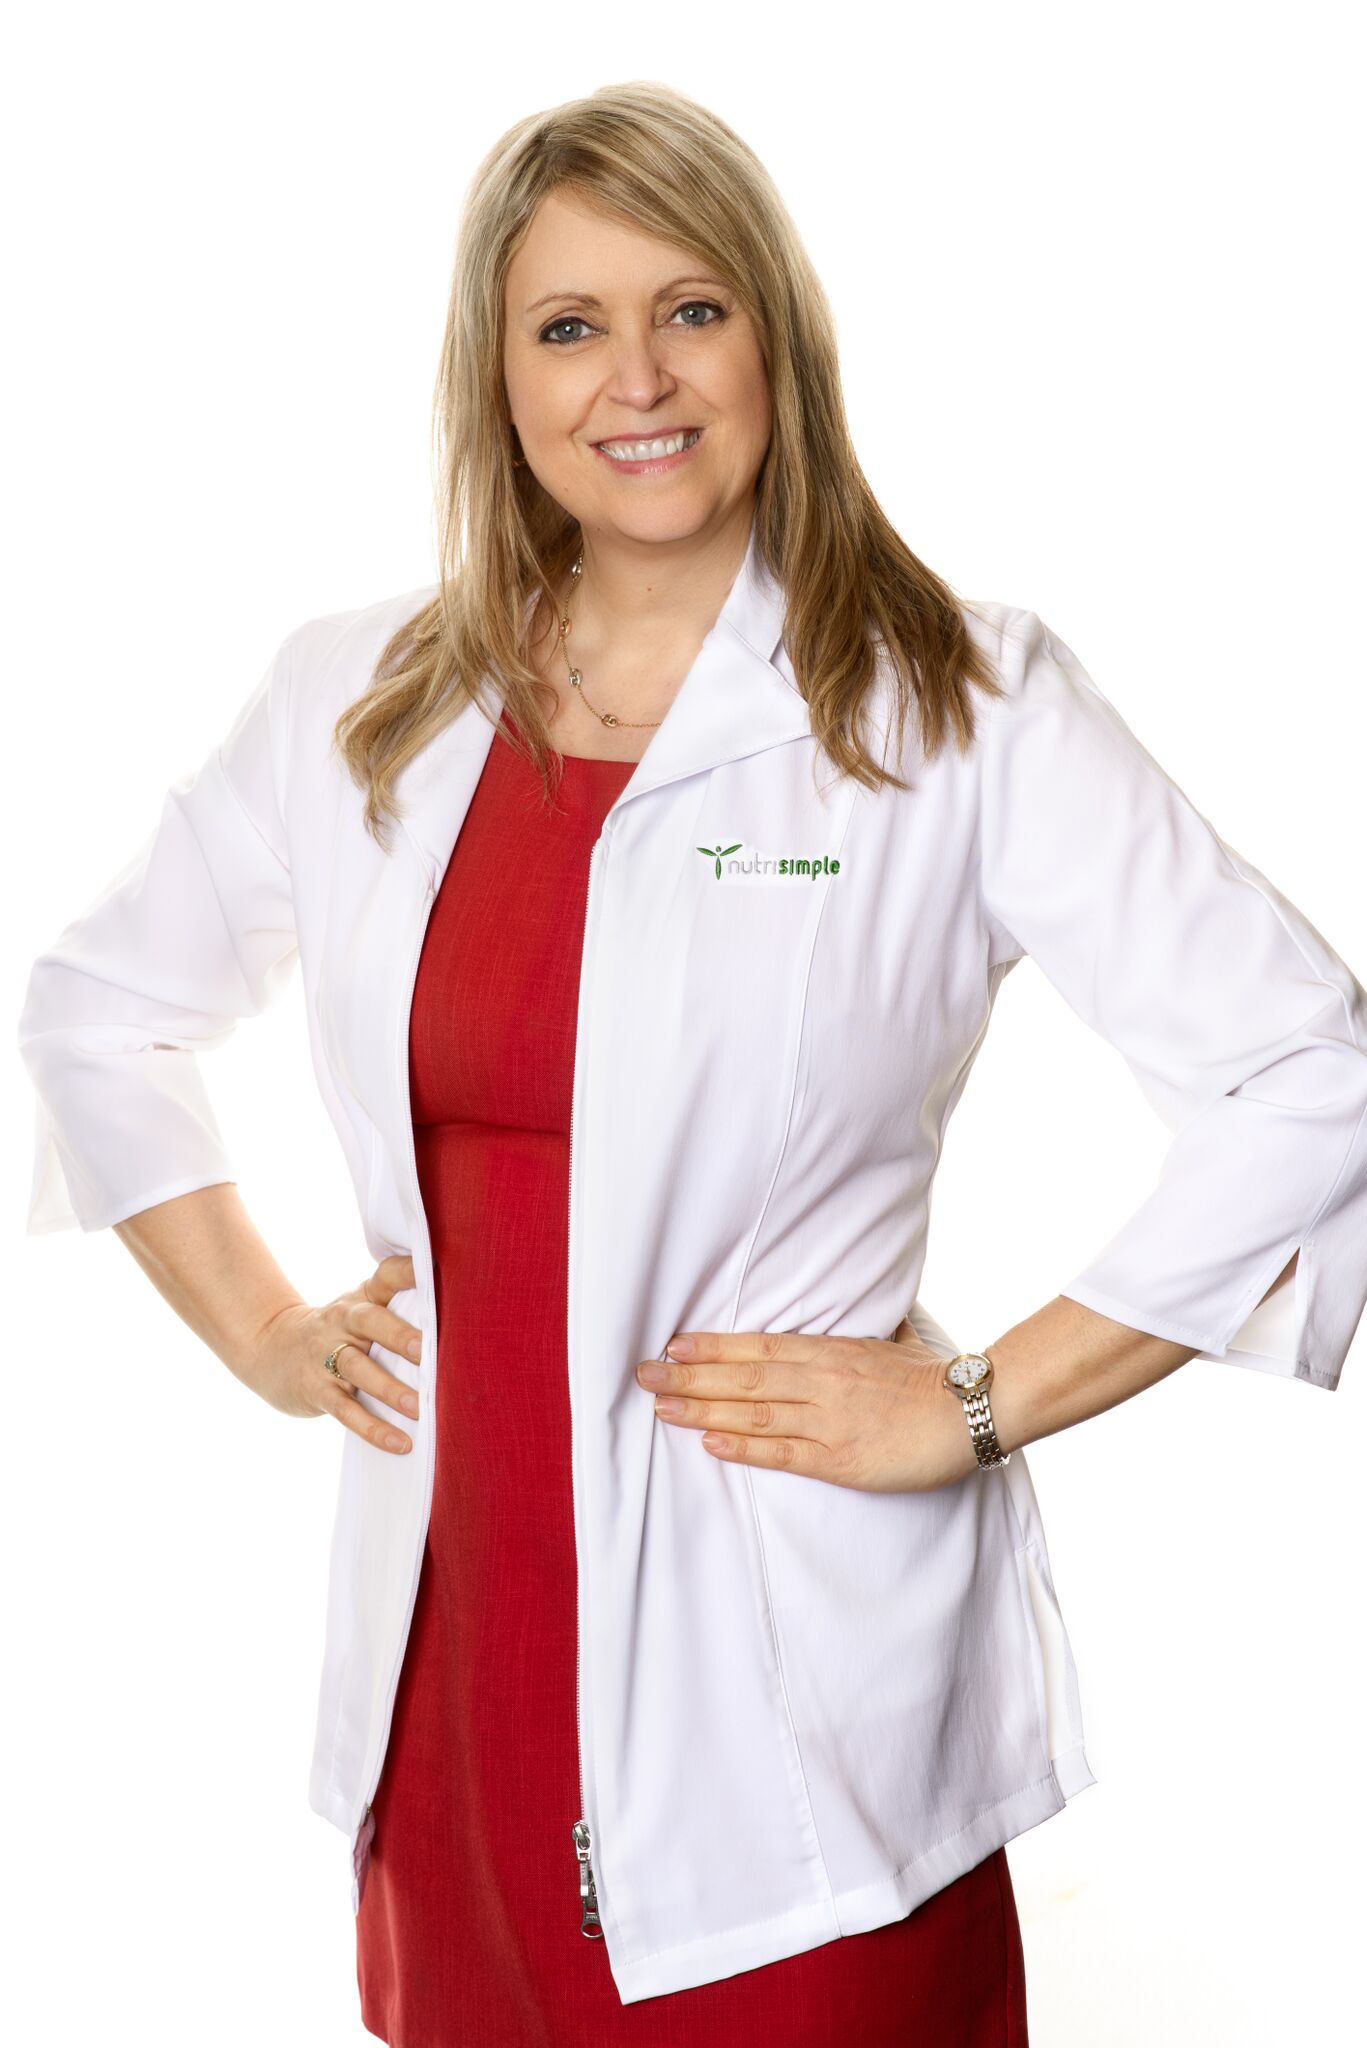 Marise Charron | Nutritionist/dietitian and Co-president of NutriSimple